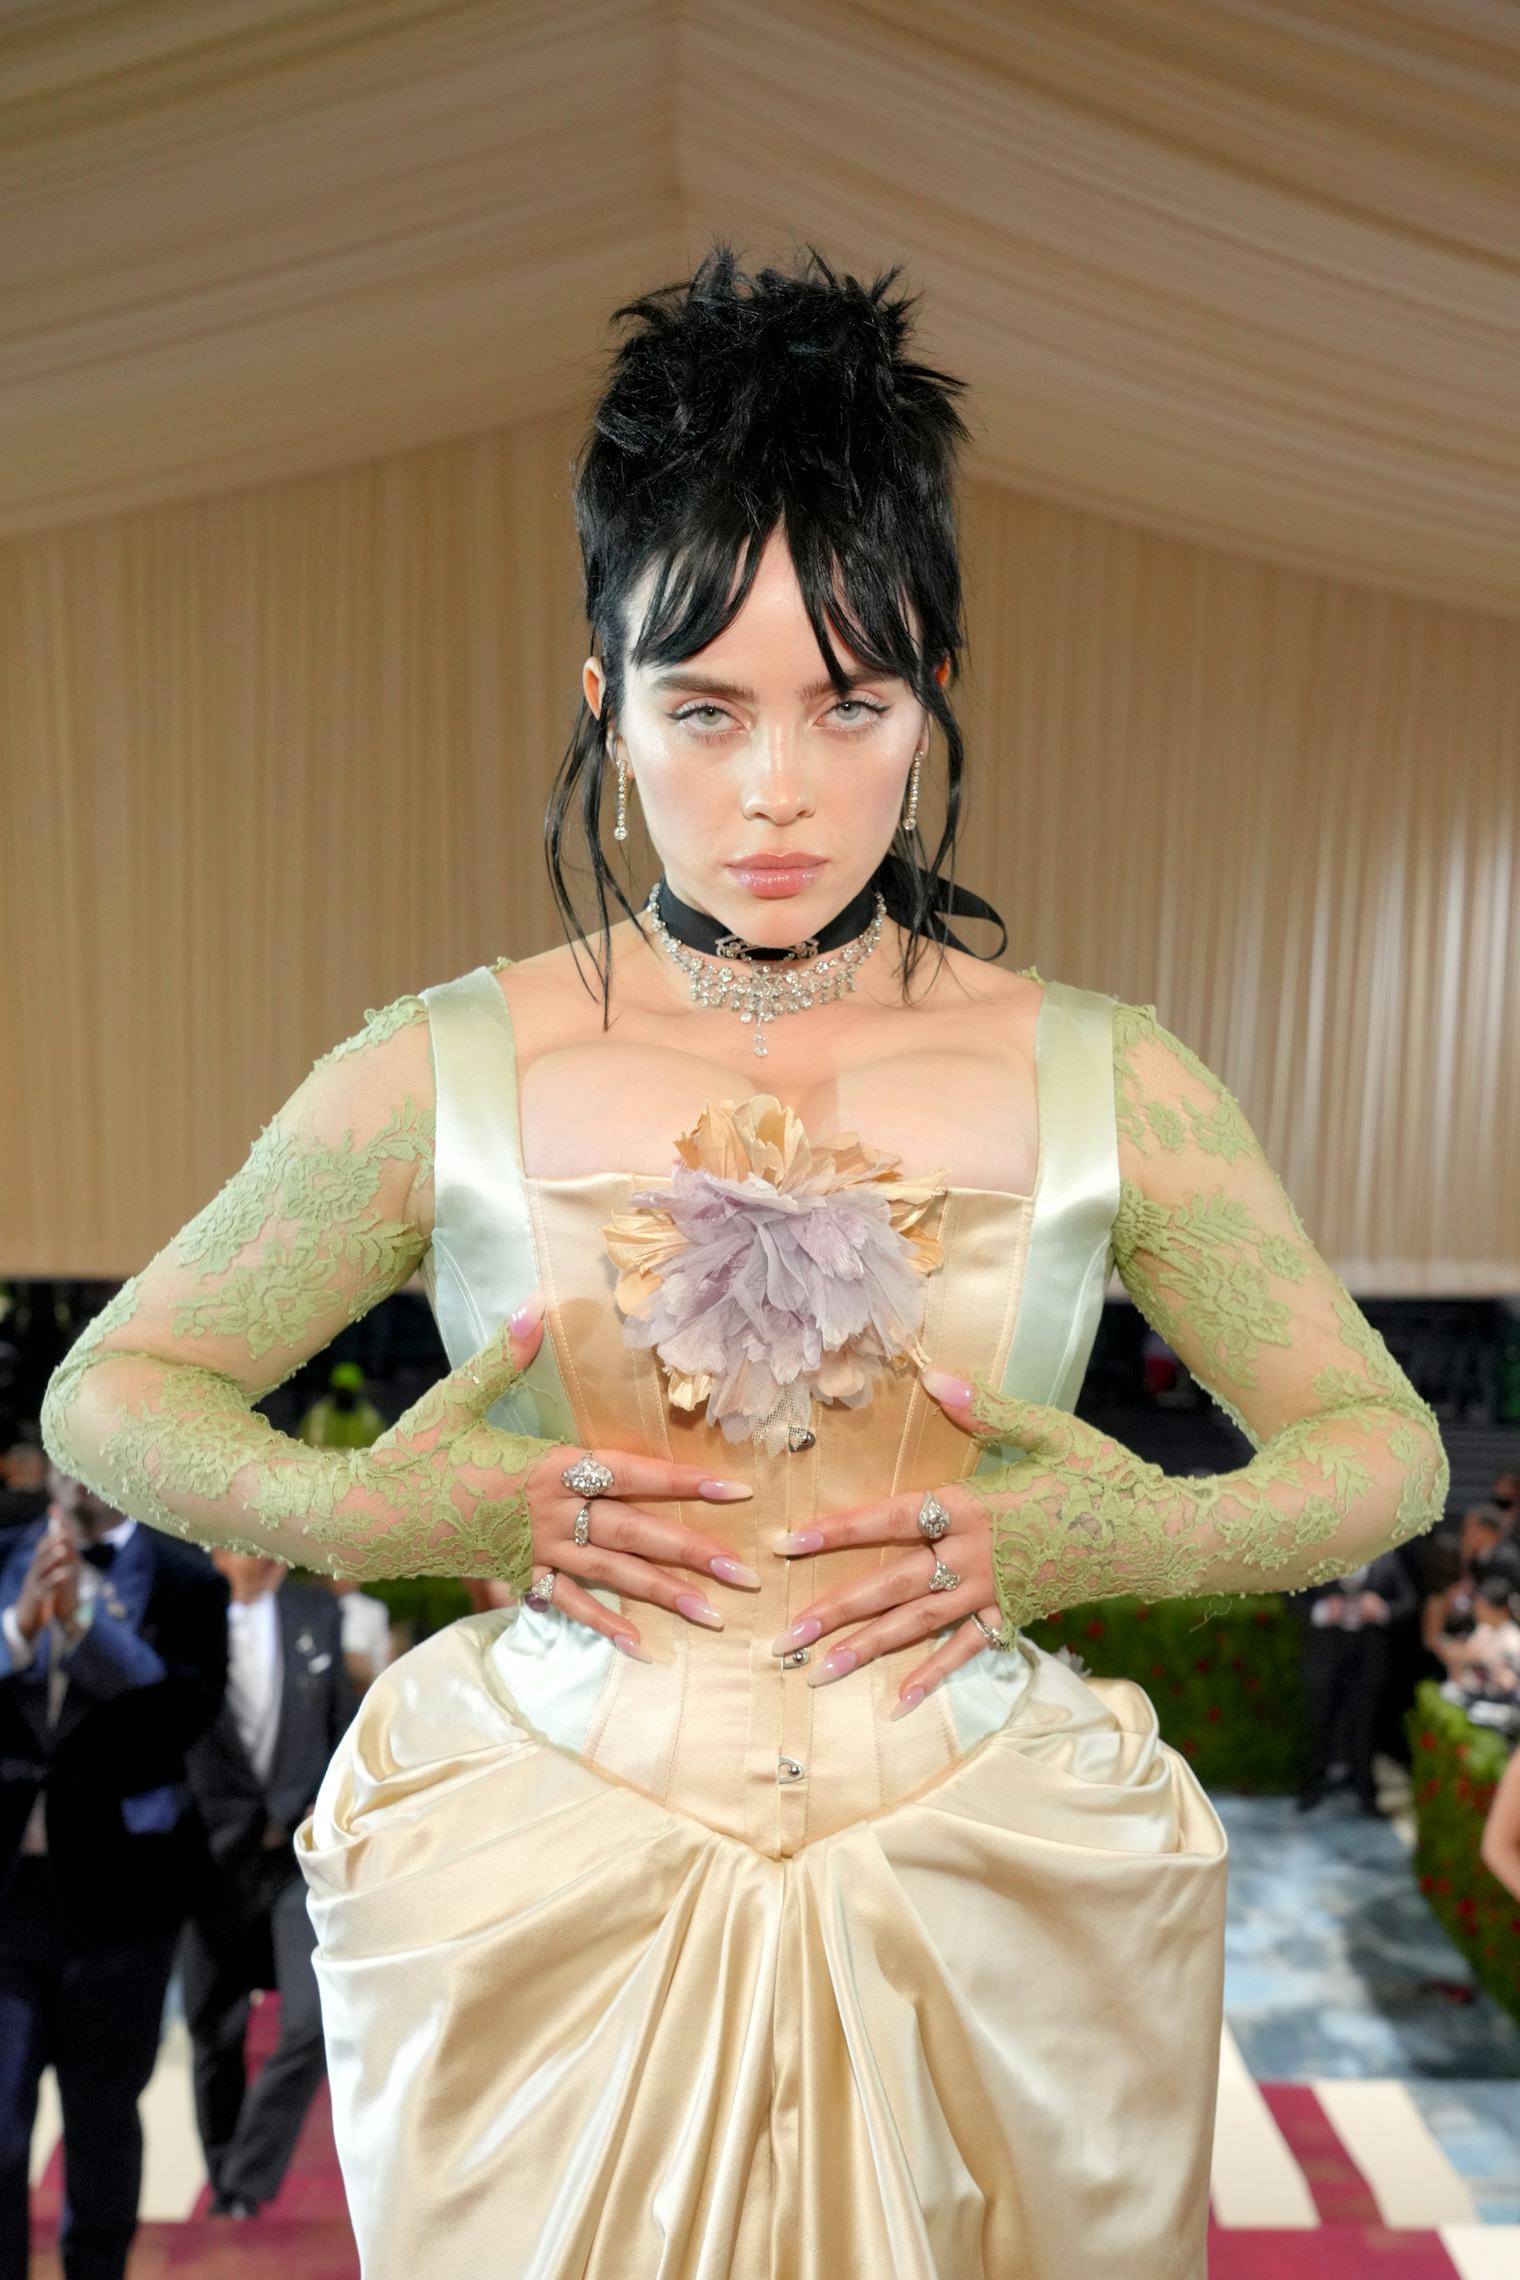 Billie Eilish Stunned In An Eco-Friendly Corset At The 2022 Met Gala